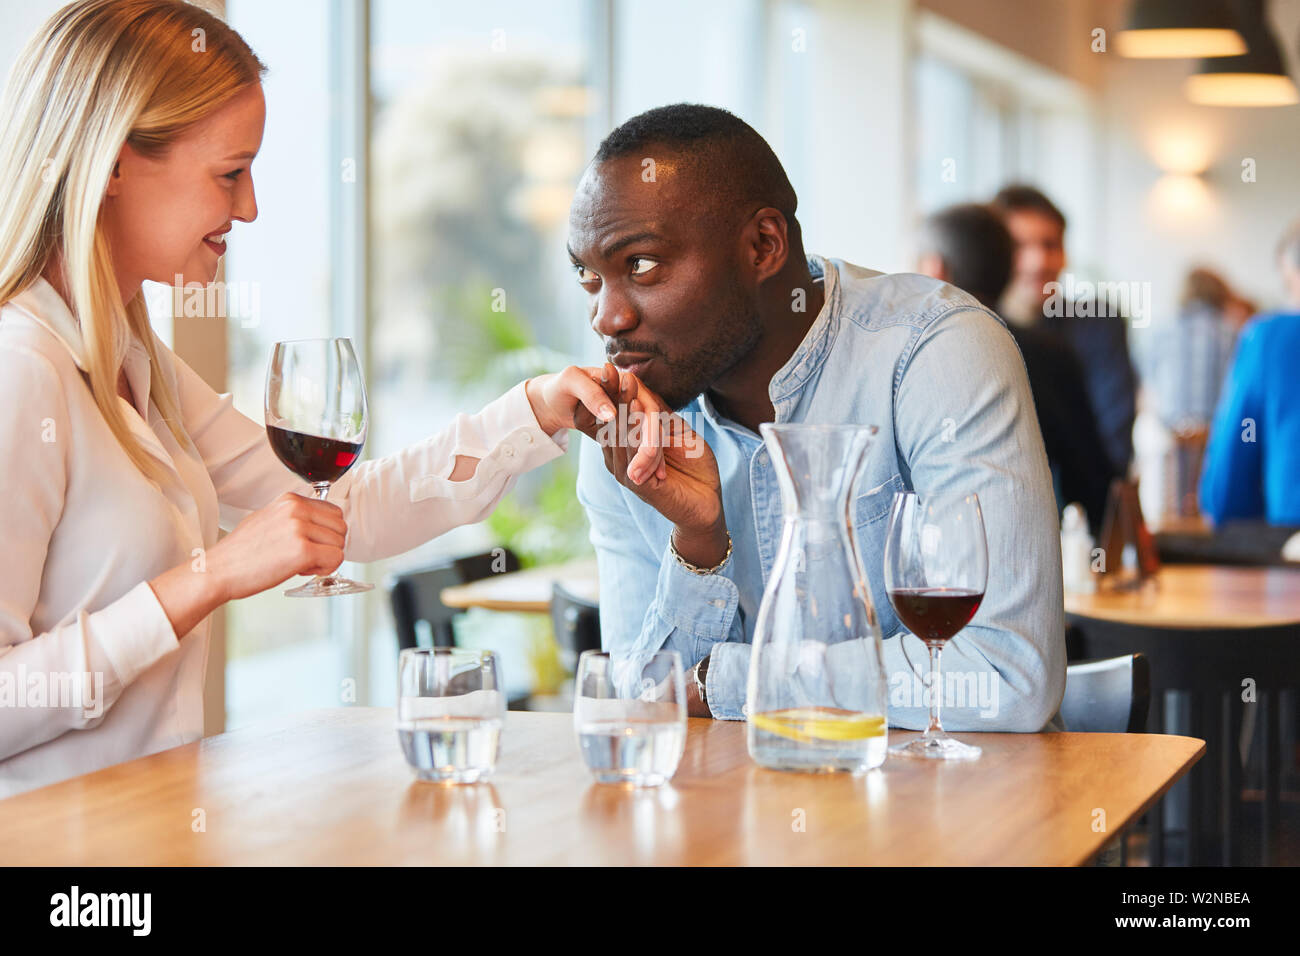 African man on date in the restaurant while flirting with his girlfriend Stock Photo